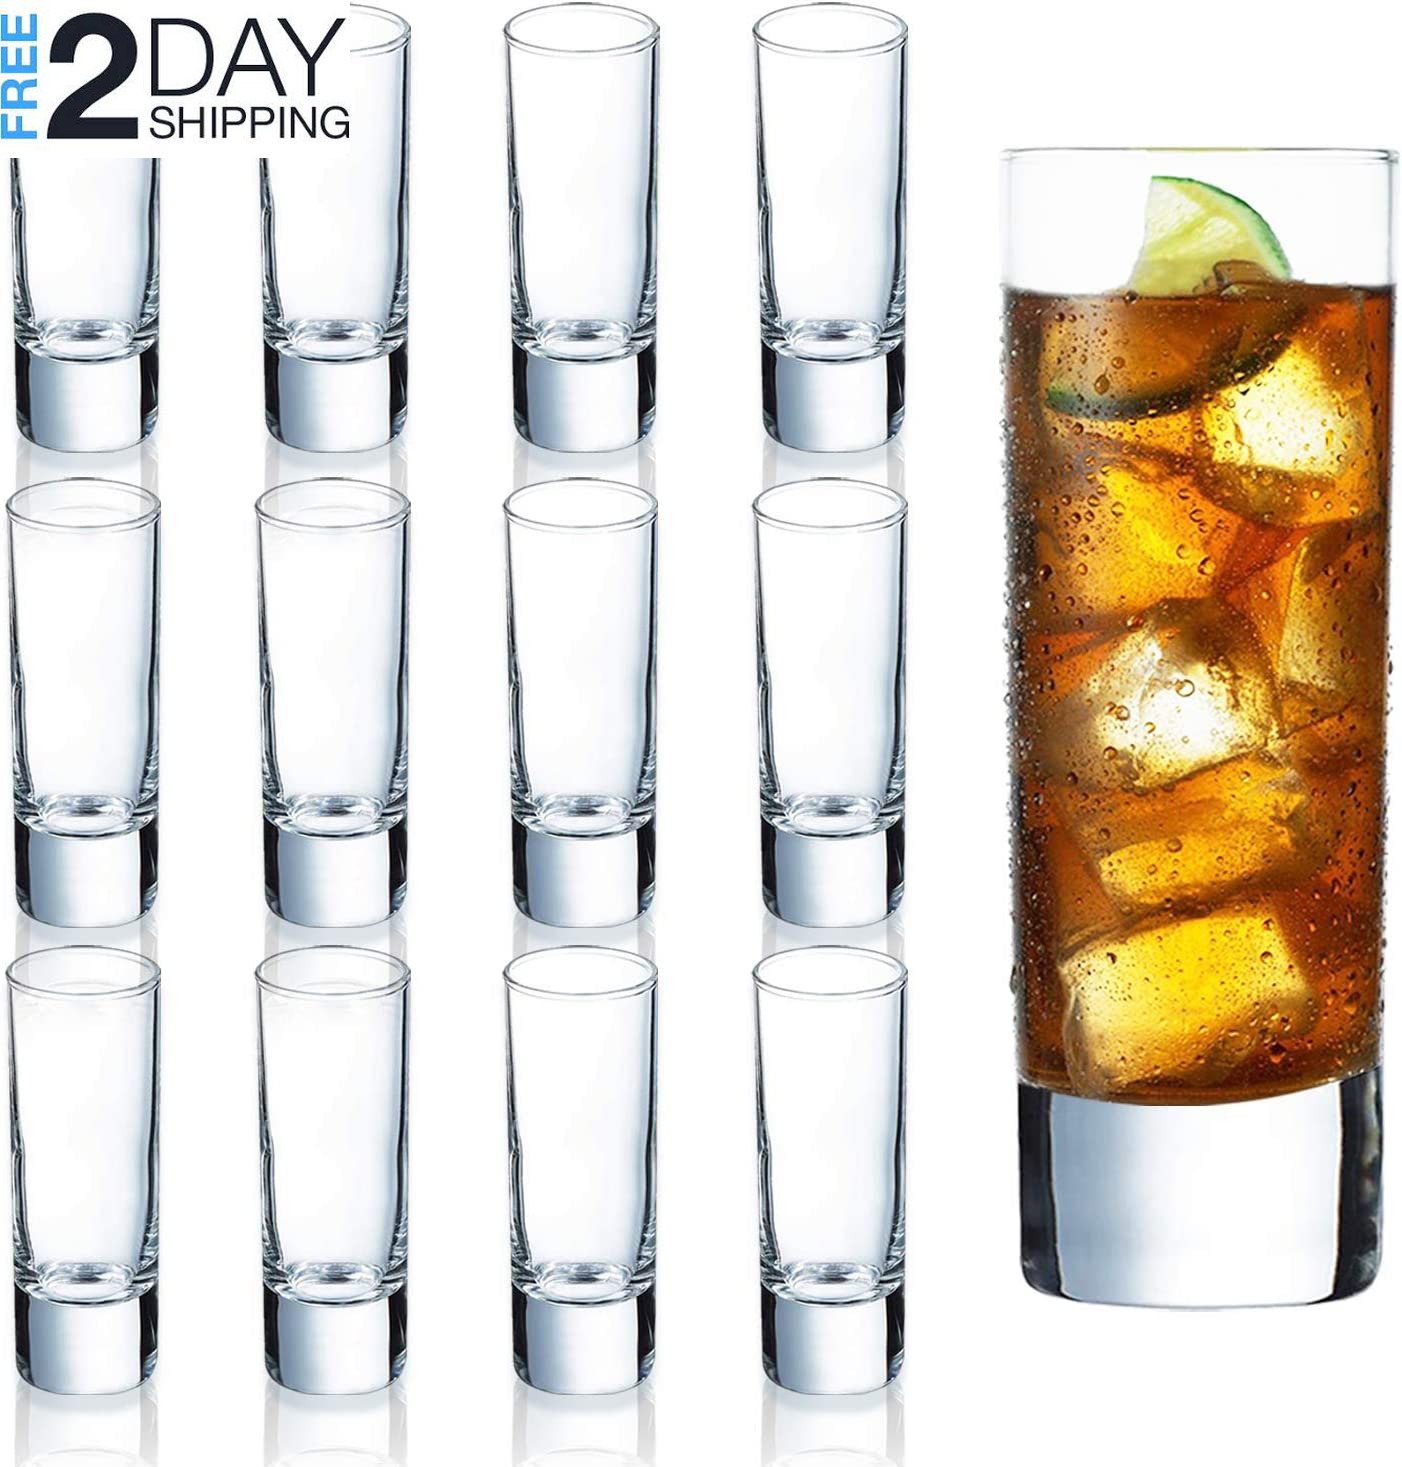 Clear Heavy Base Shot Glasses 12 Pack, 2 Oz Tall Glass Set for Whiskey, Tequila